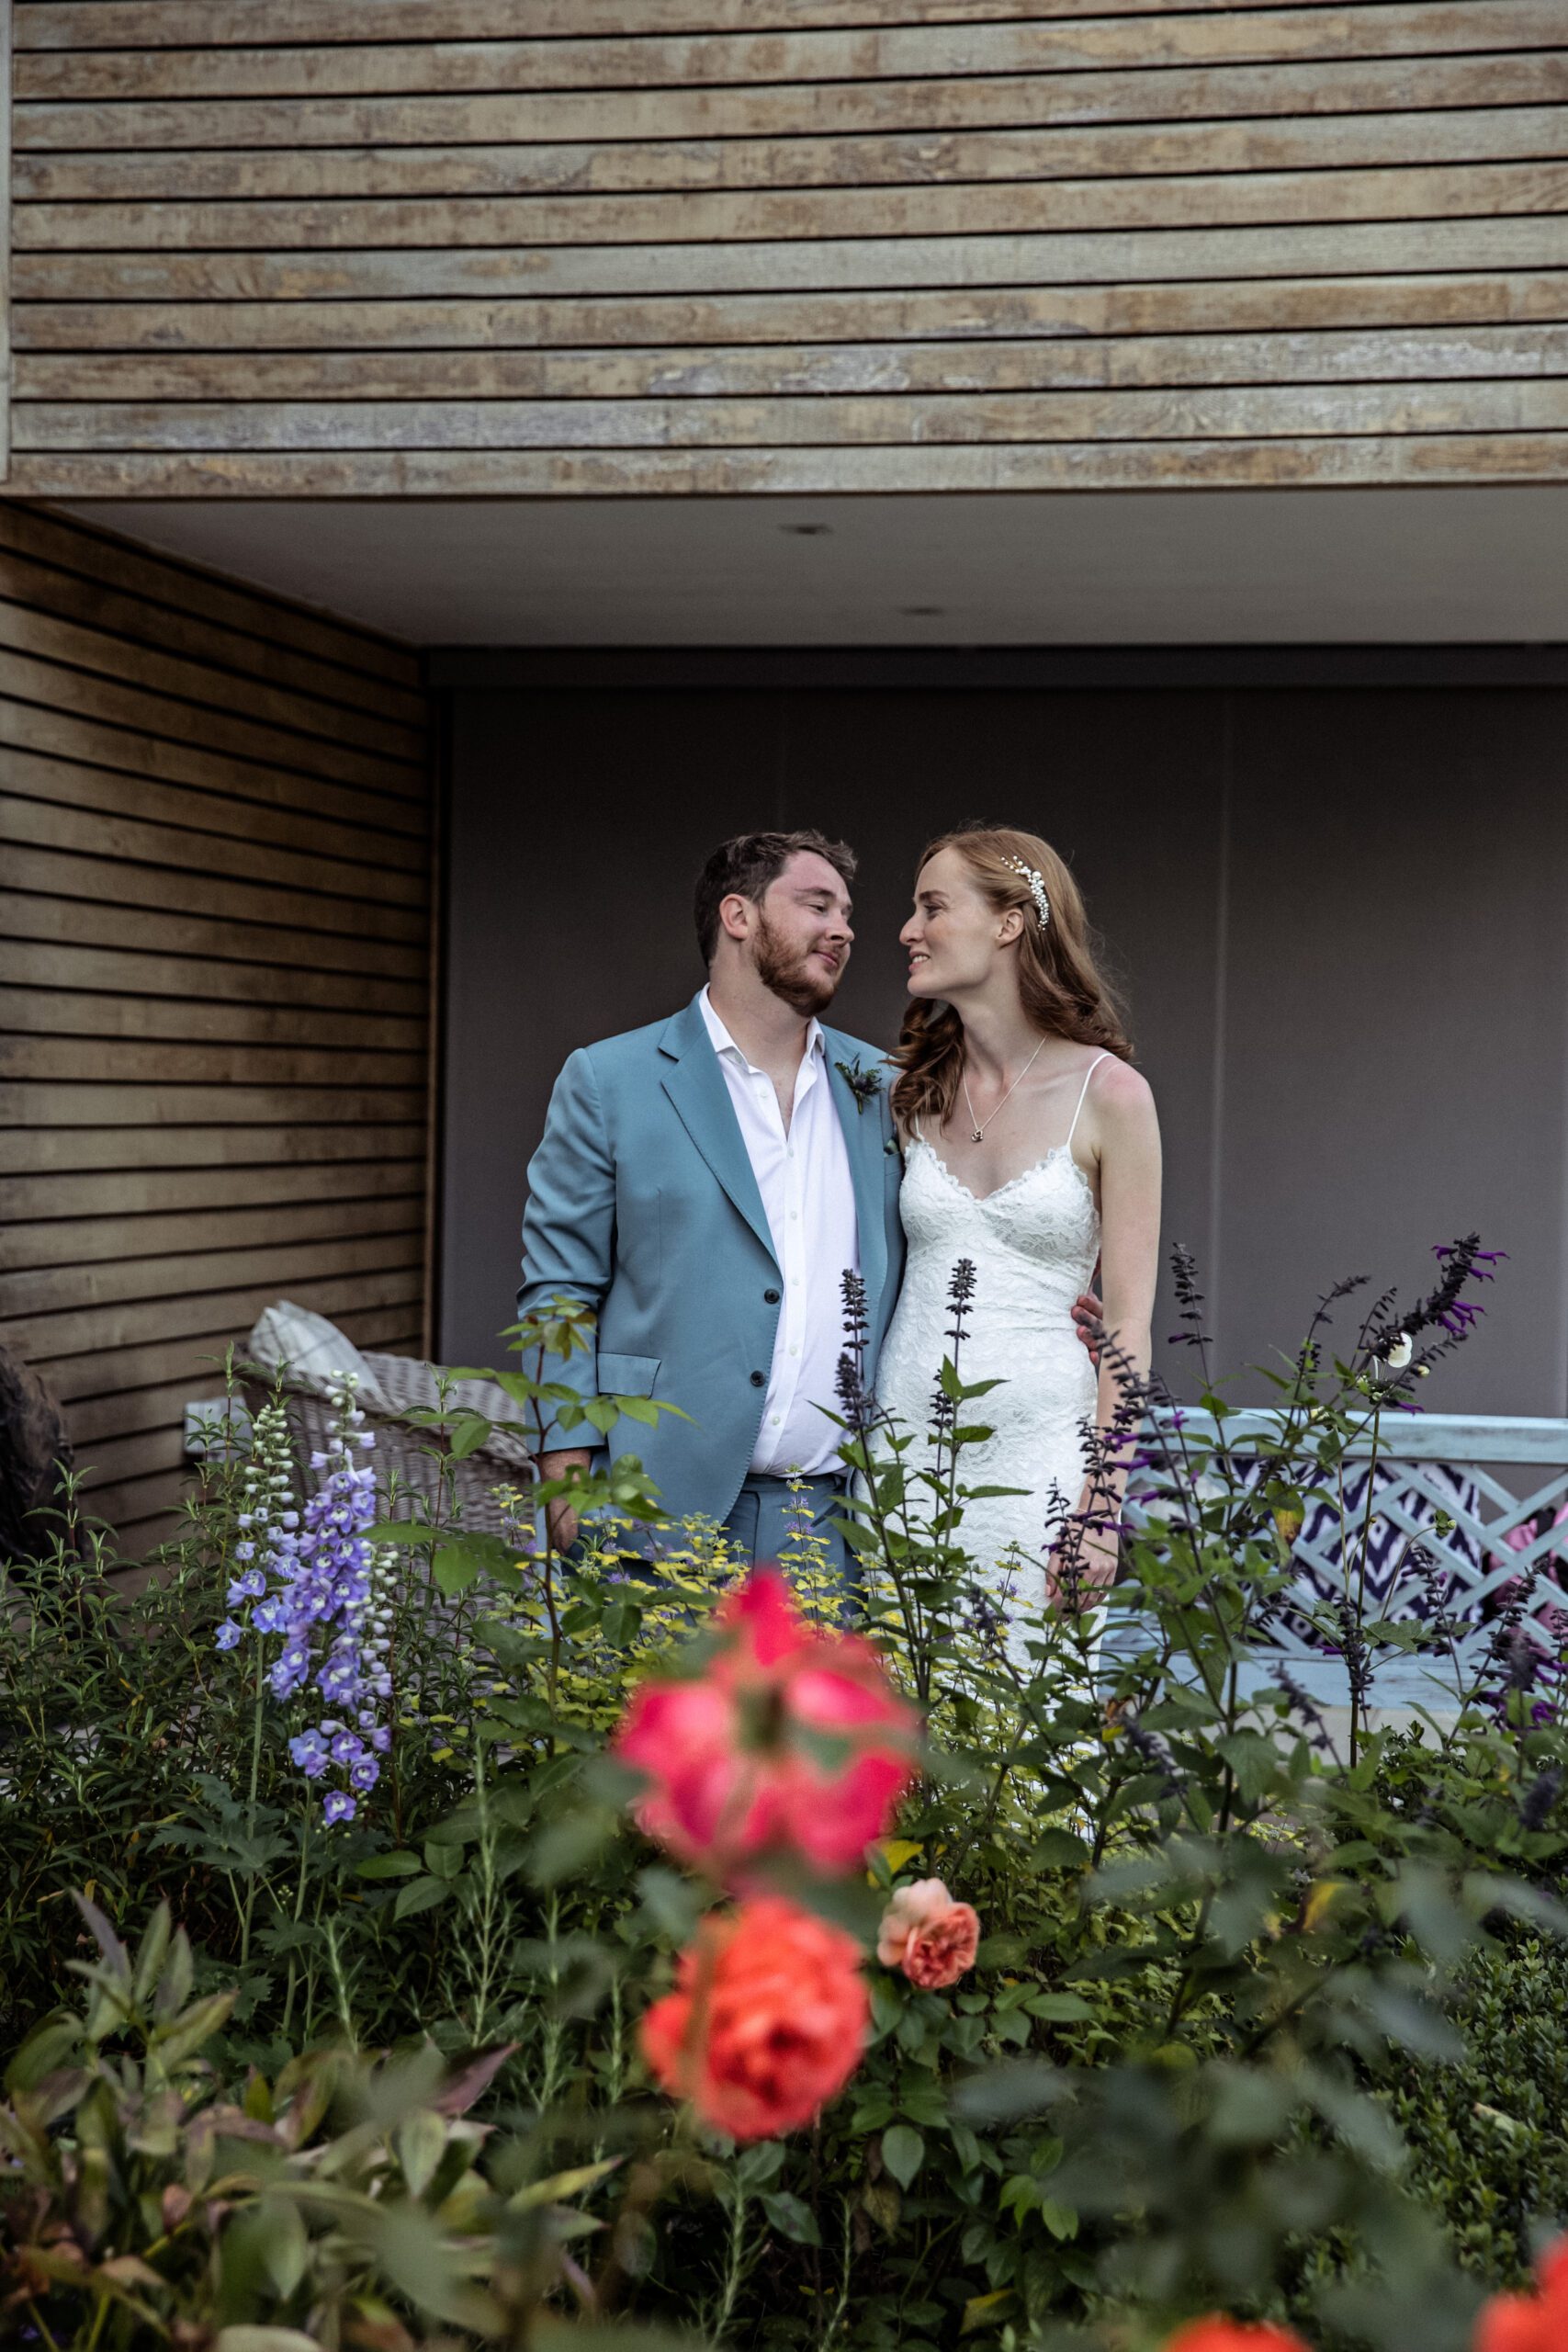 the bride and groom pose for picture in their garden with flowers in foreground